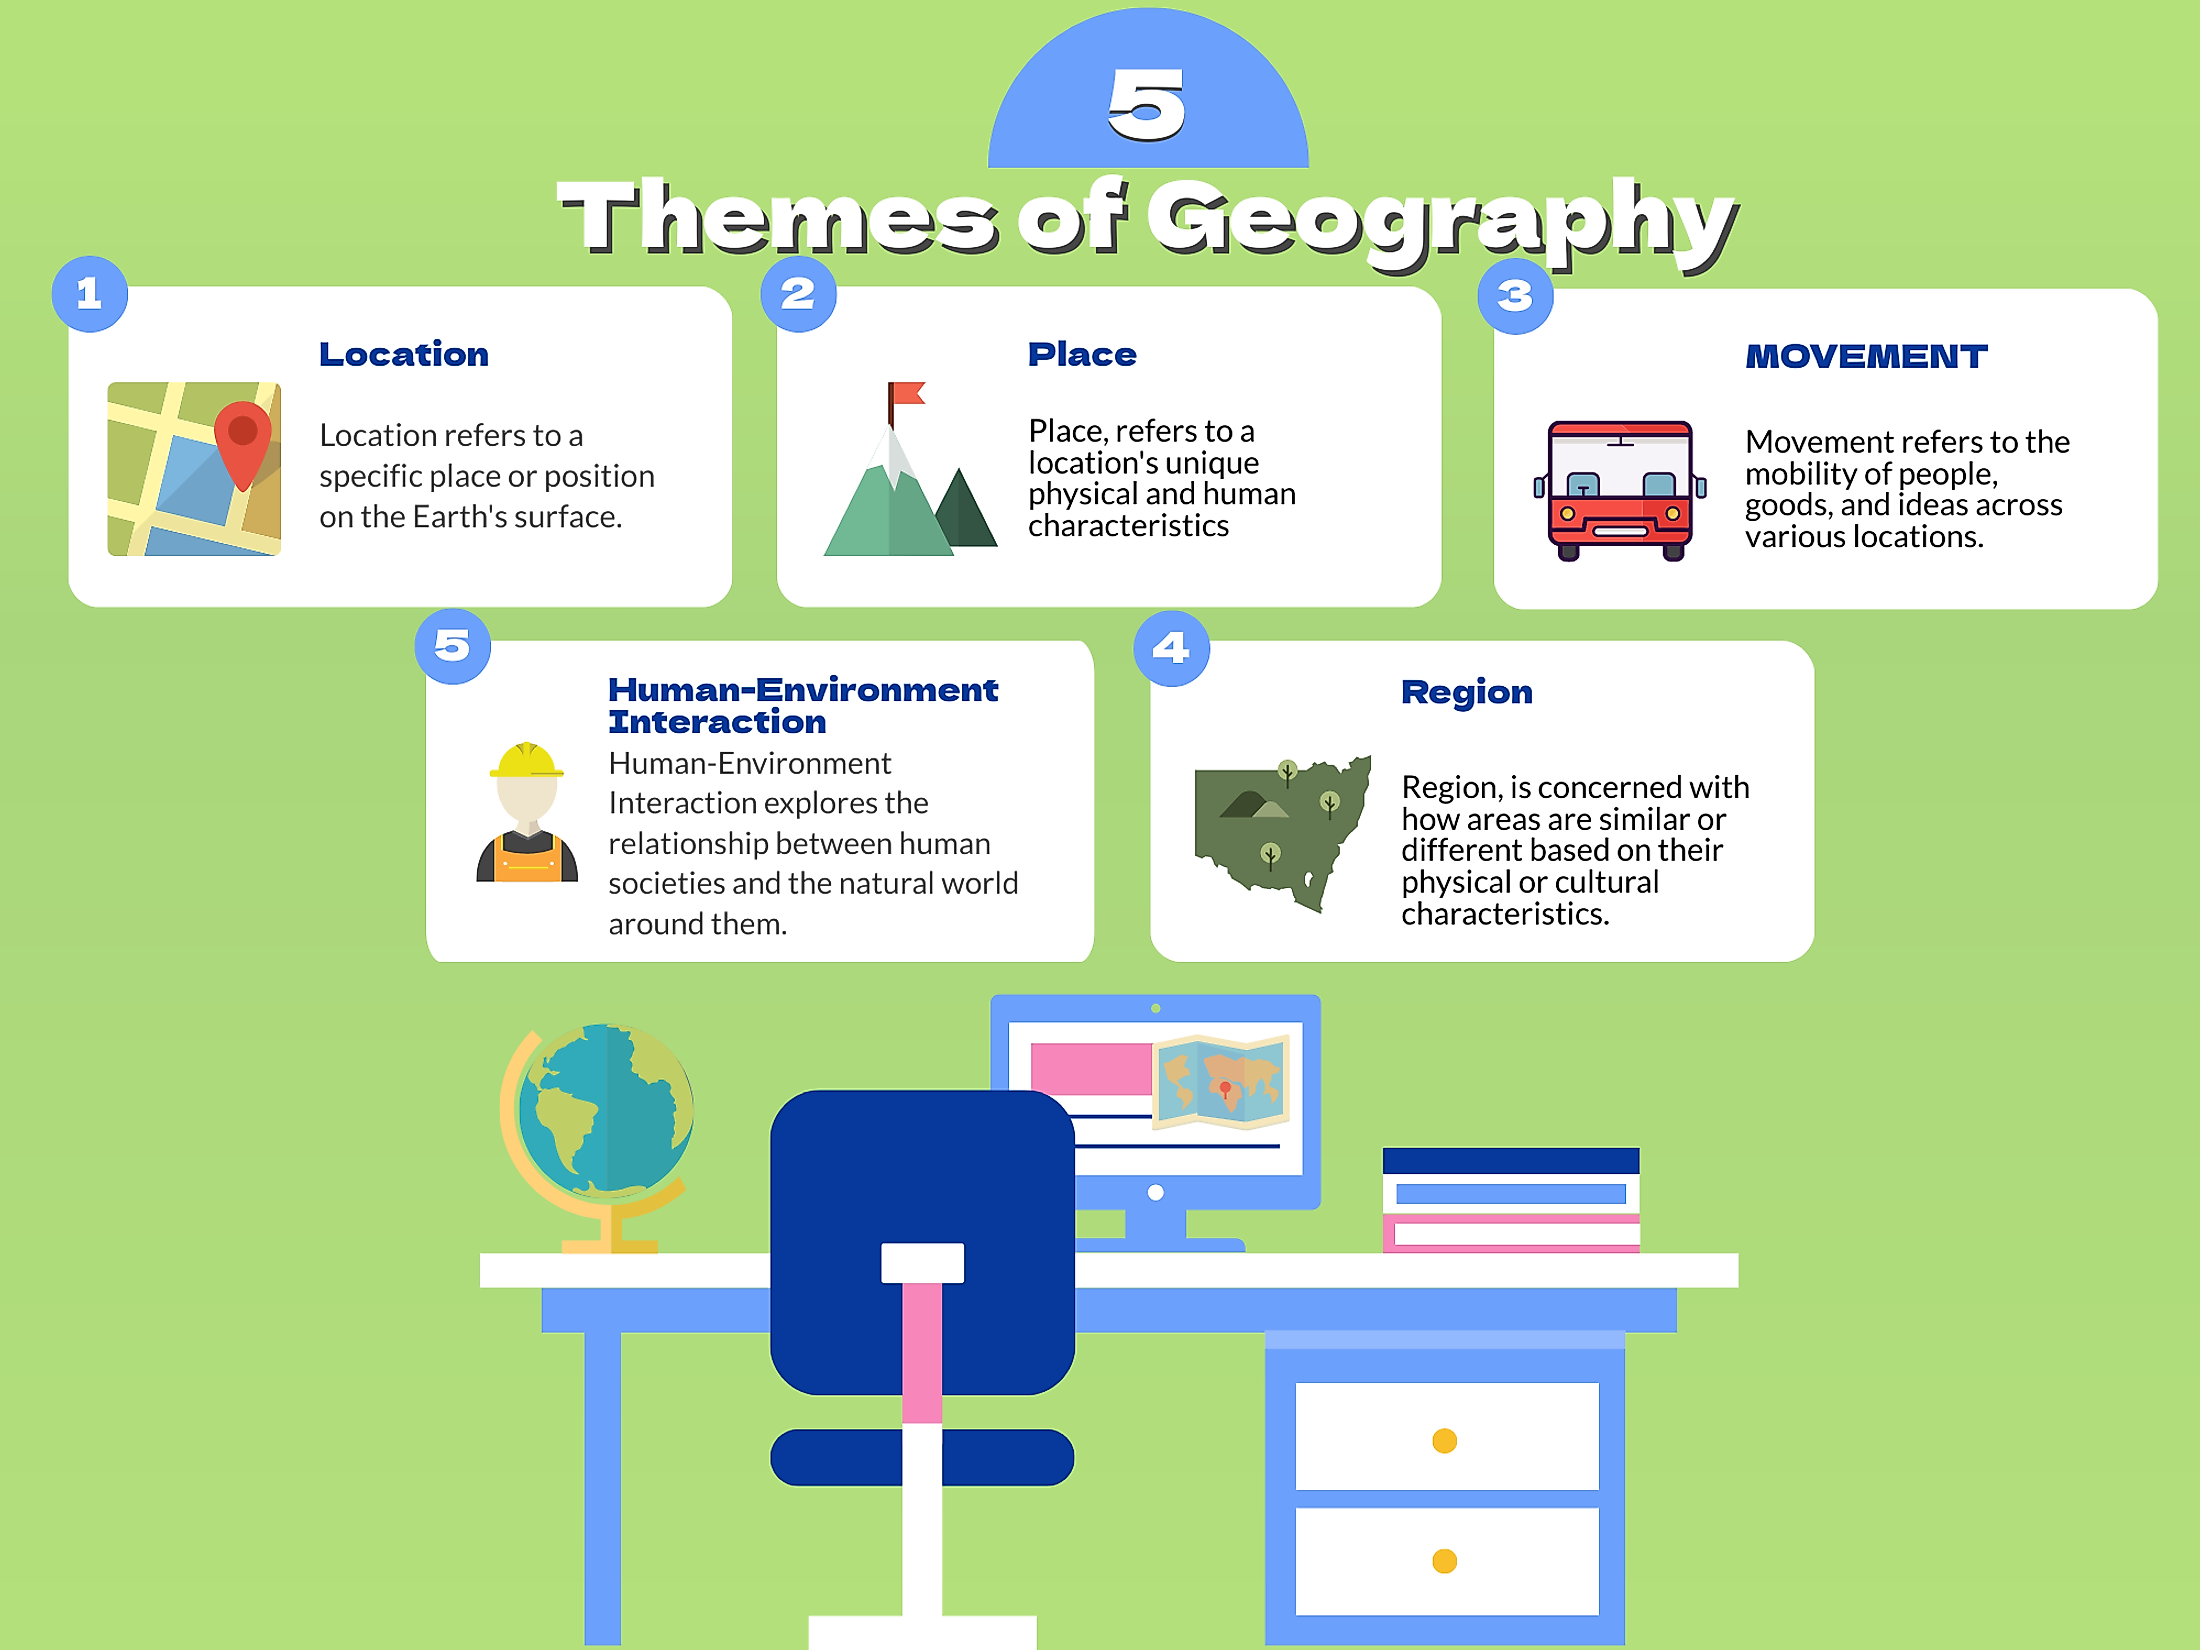 examples of human geography